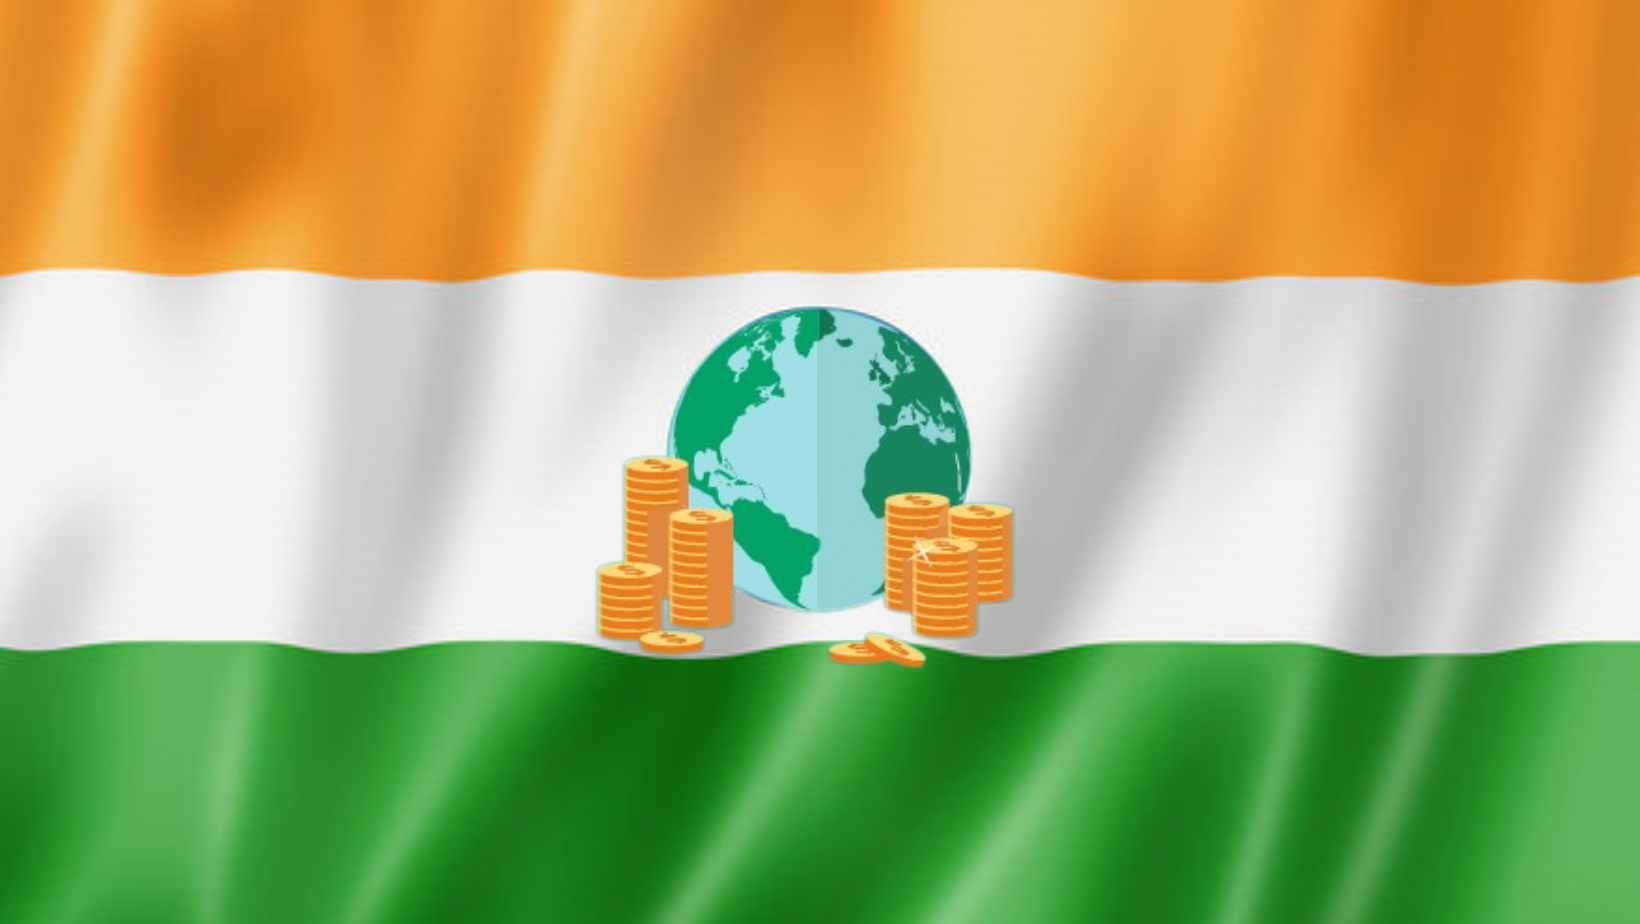 India: an emerging market or a modern high growth economy?